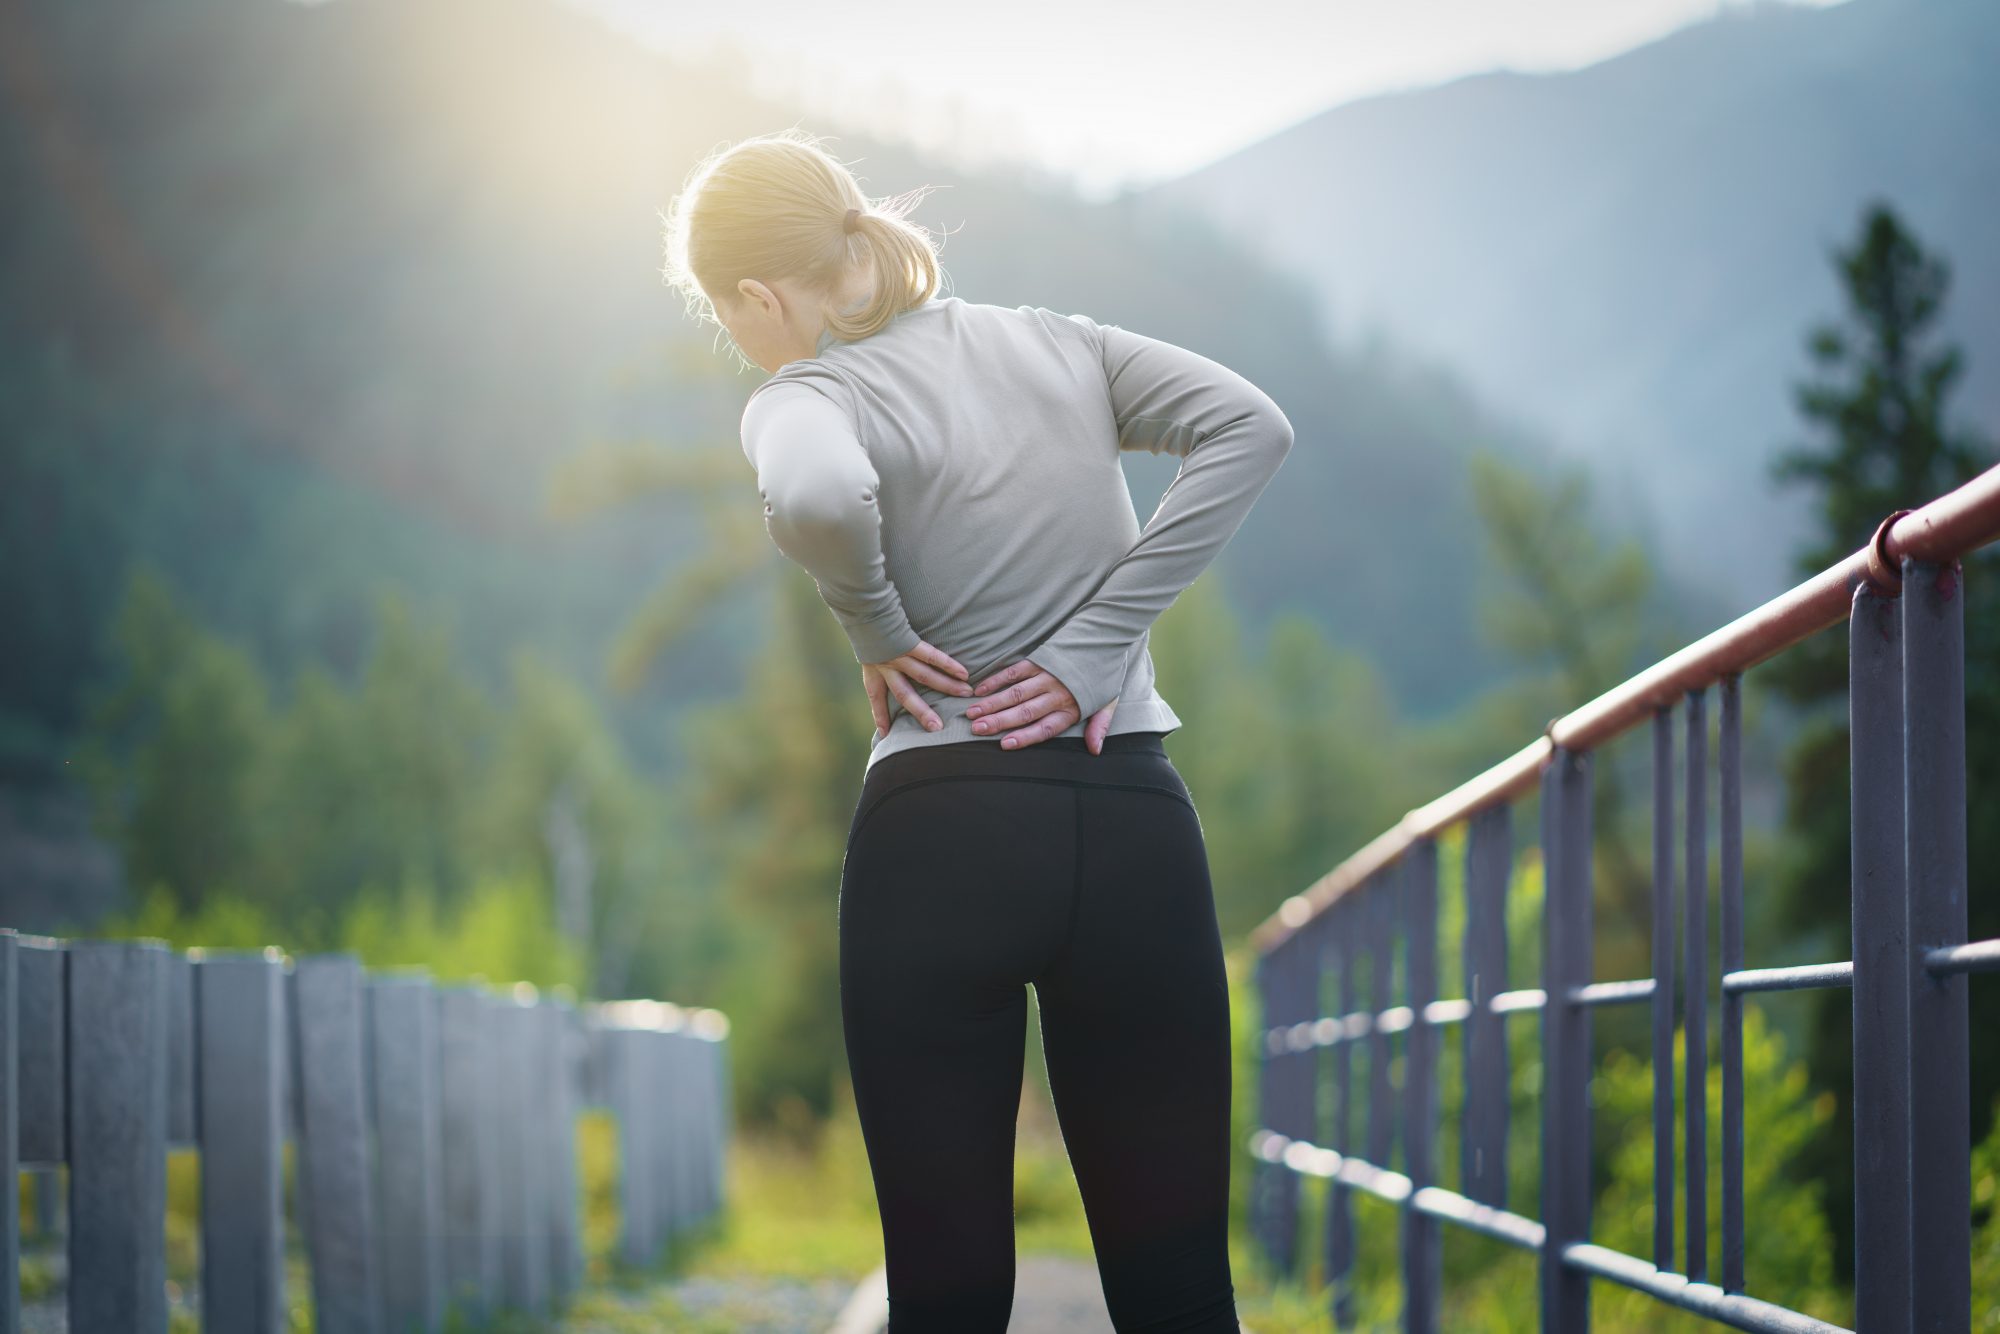 Back view of adult runner woman suffering from Backache or Sore waist after running.